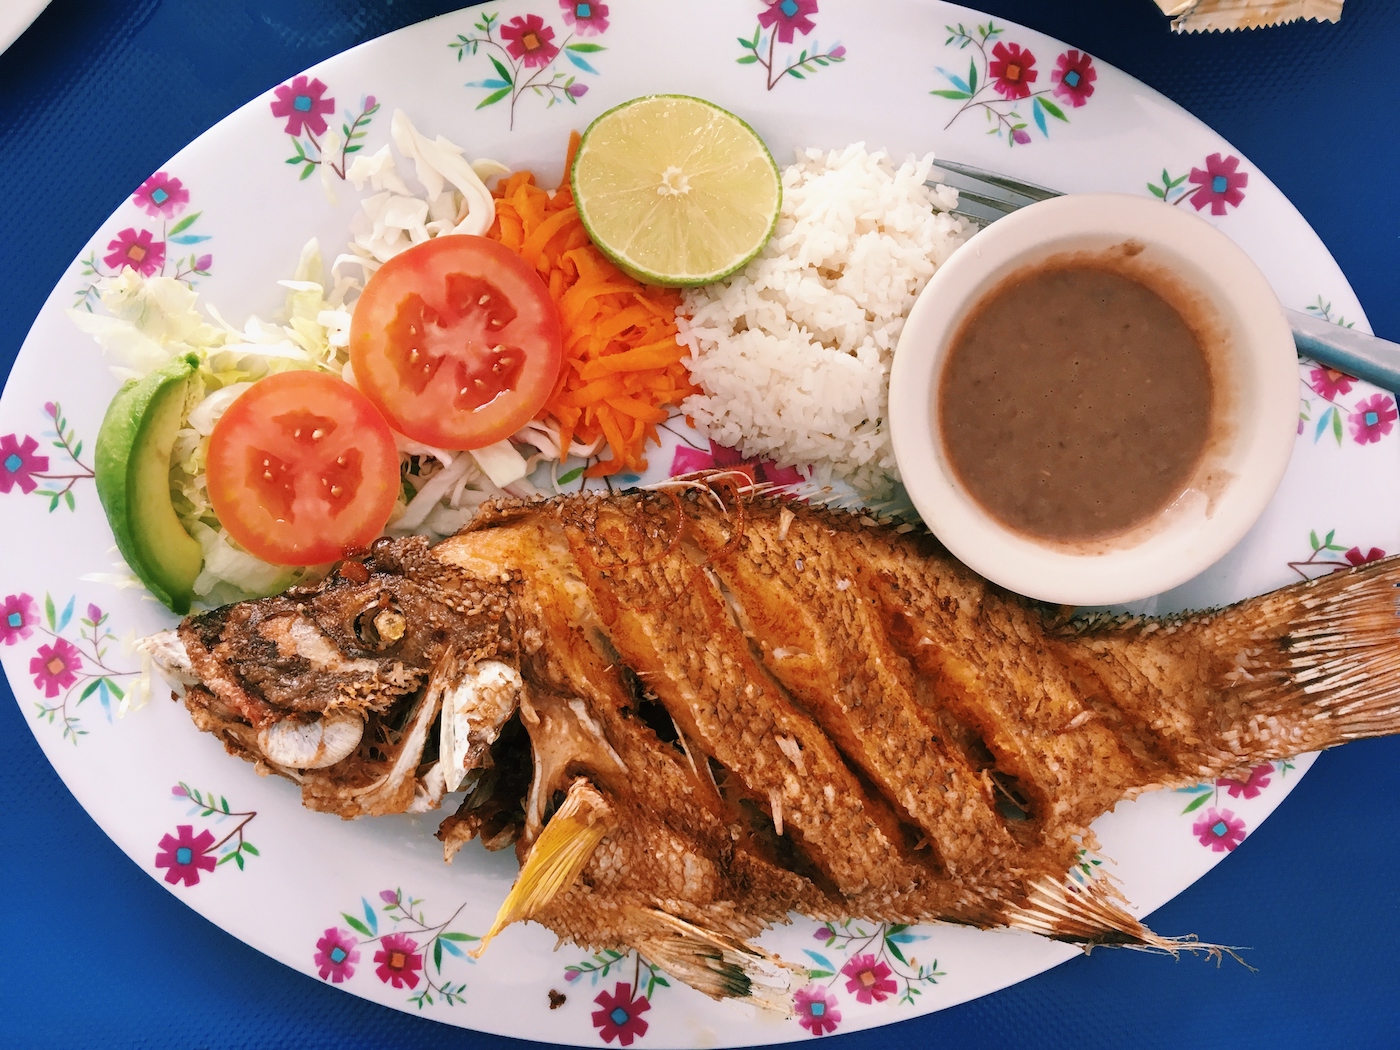 Fried fish with a small side salad of lettuce and tomatoes, beans, and rice at El Pirate in Playa del Carmen